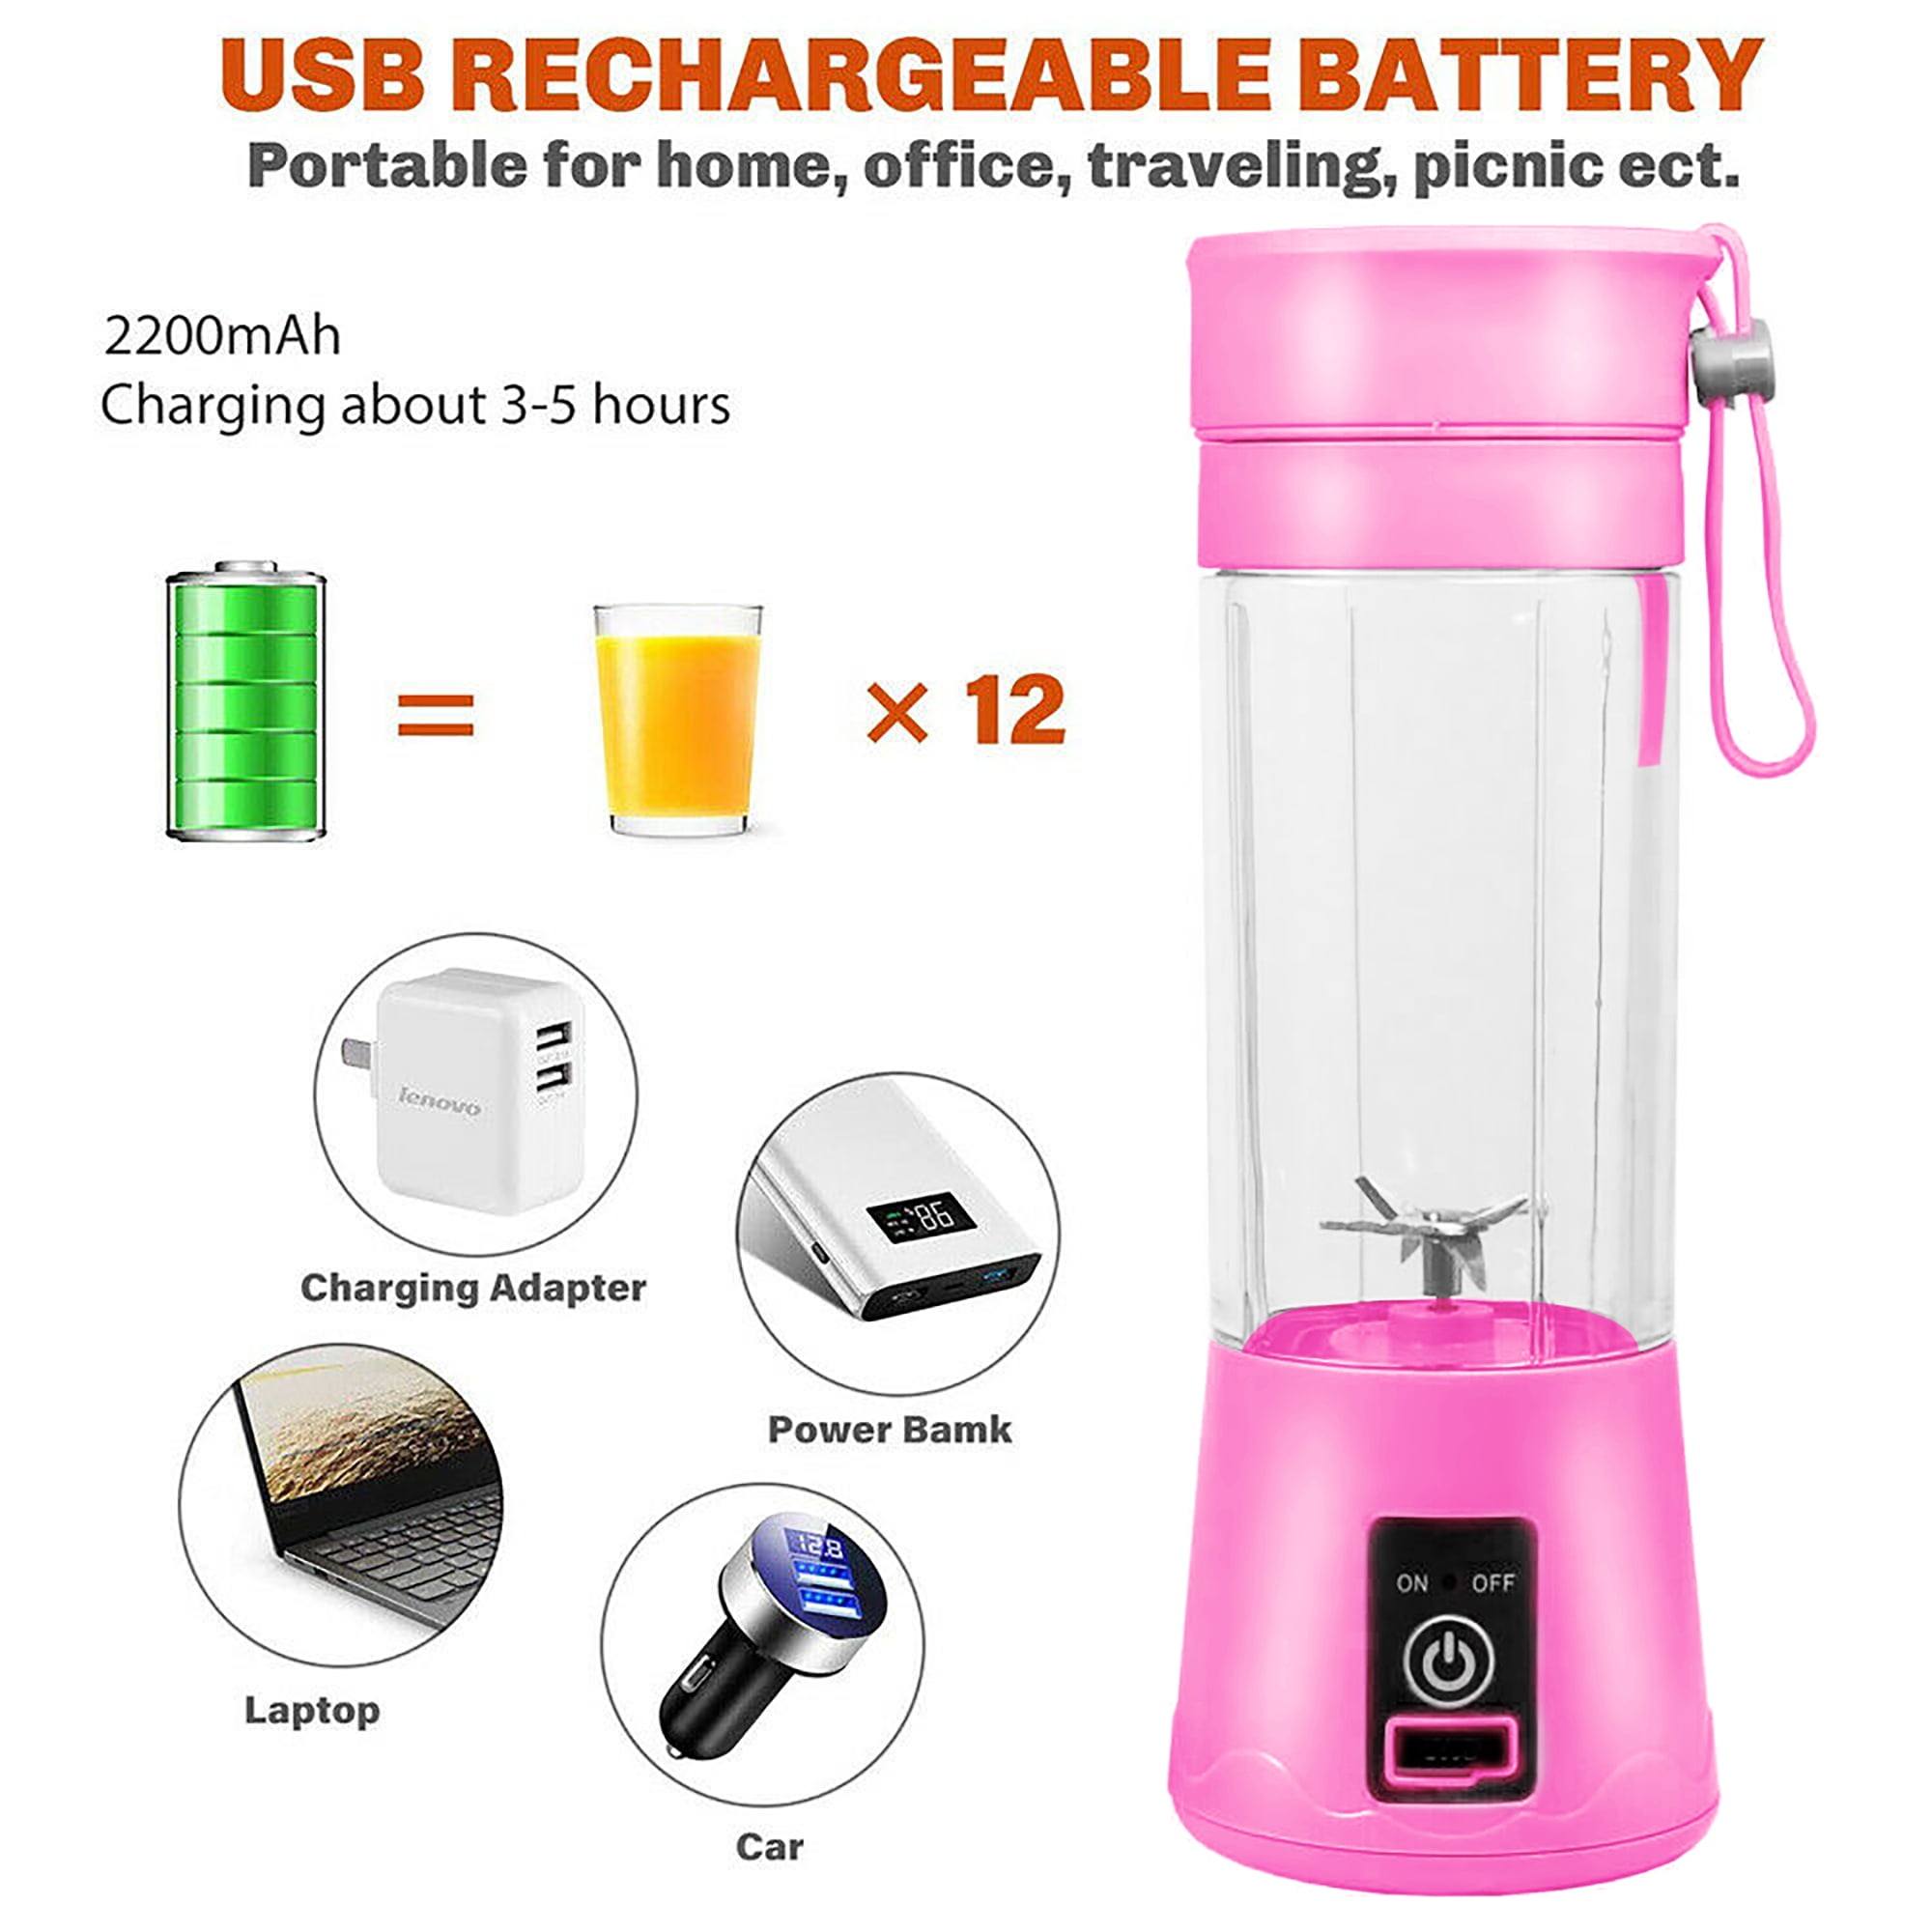 Halfrate.in - Rechargeable Portable Electric Mini USB Juicer